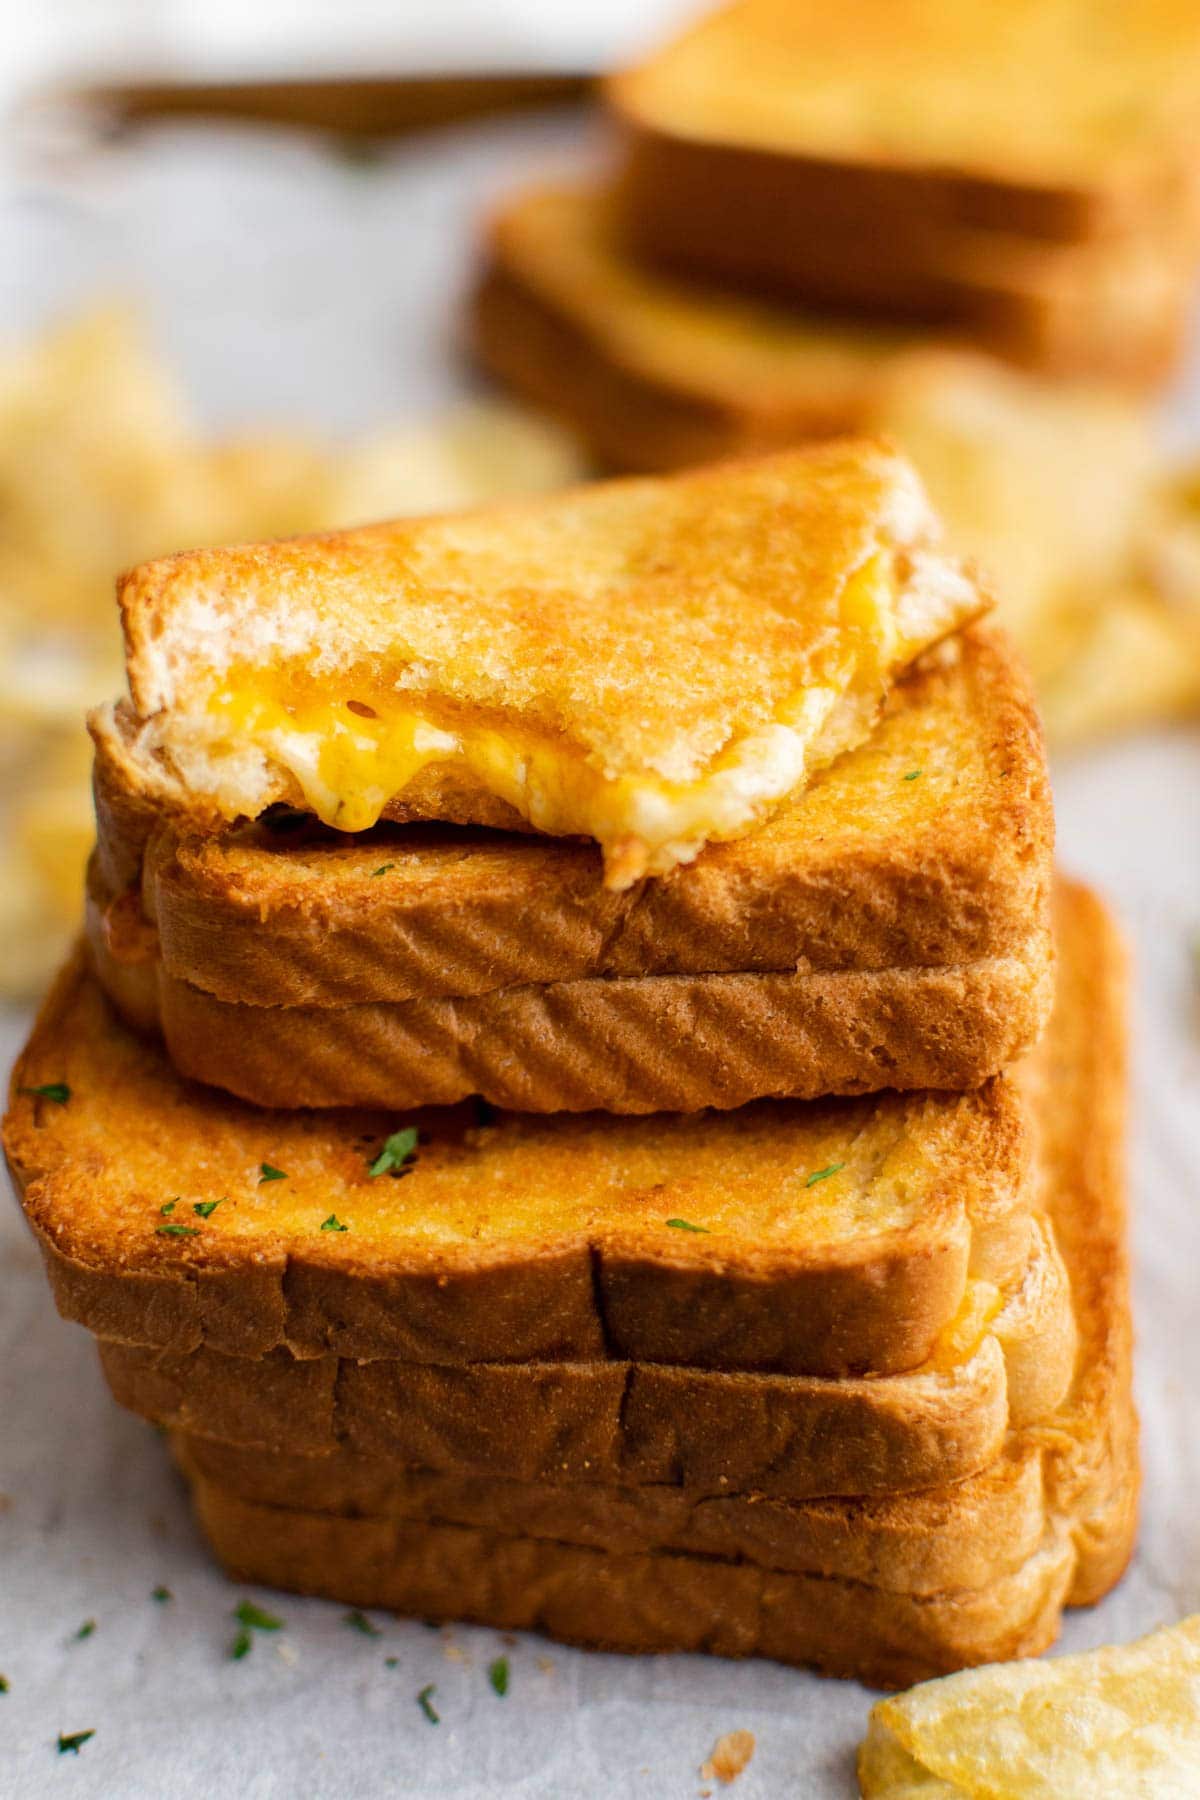 https://www.yellowblissroad.com/wp-content/uploads/2021/05/Oven-Grilled-Cheese-9.jpg